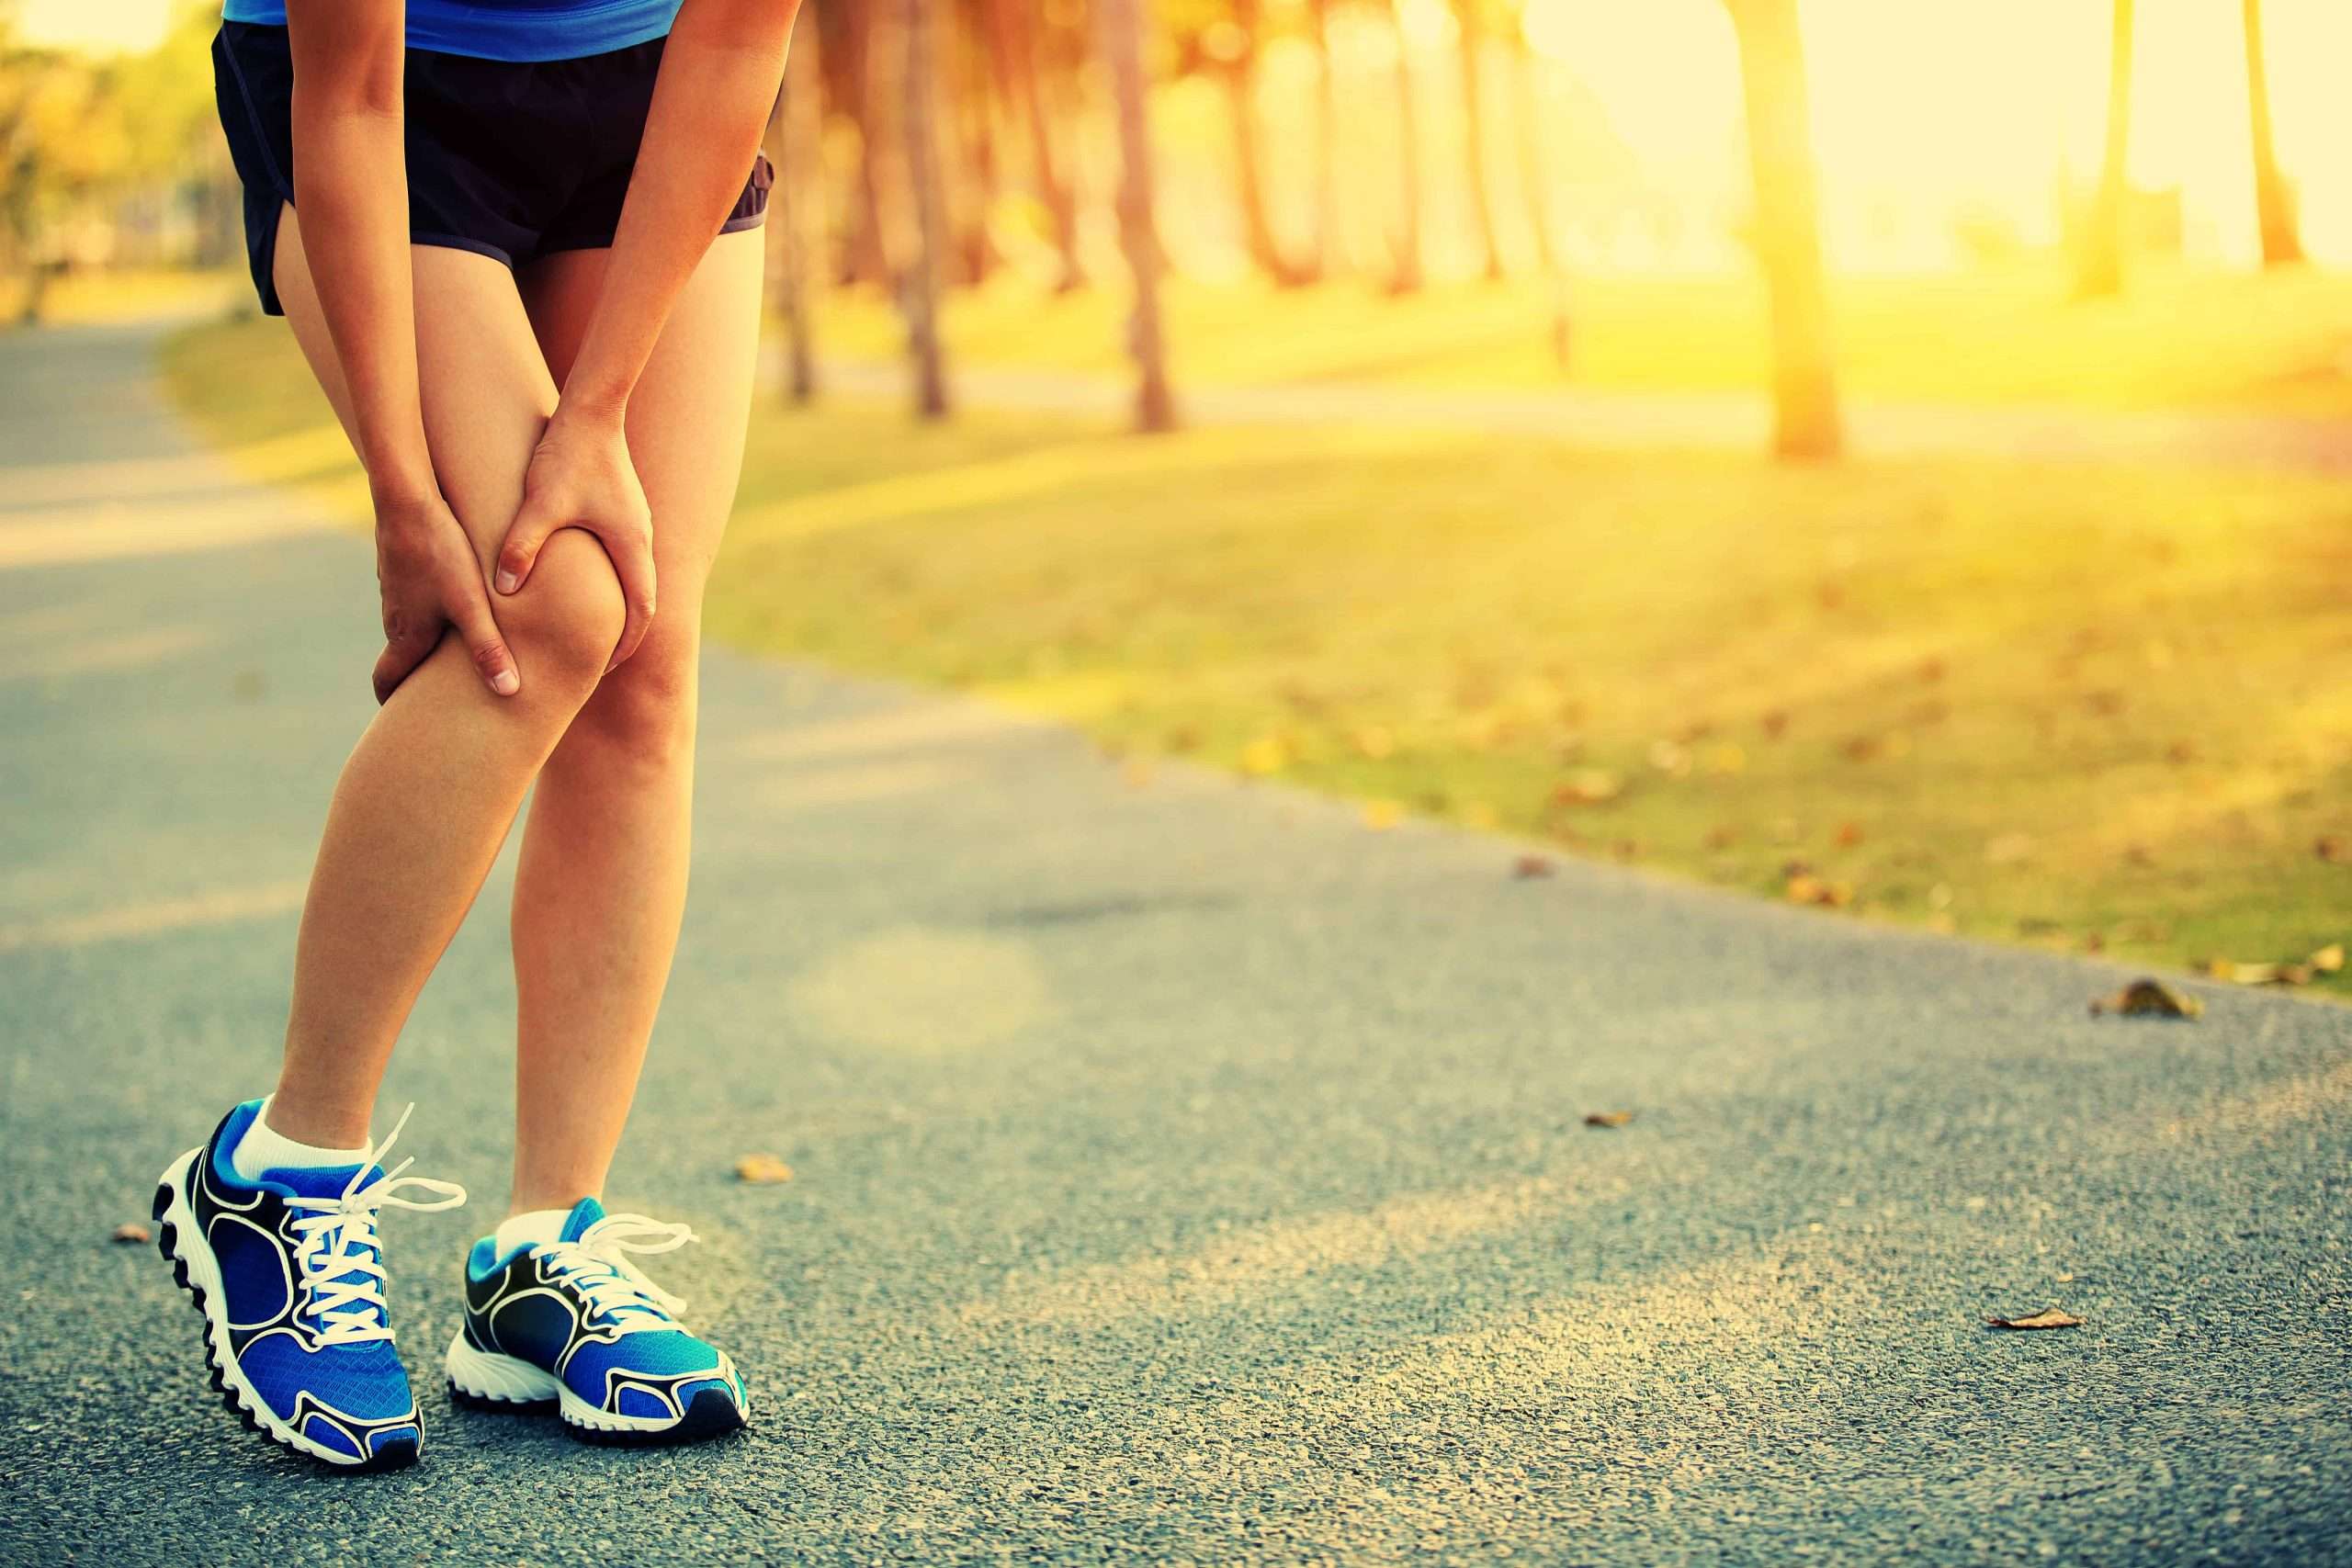 What could be causing pain behind your knee